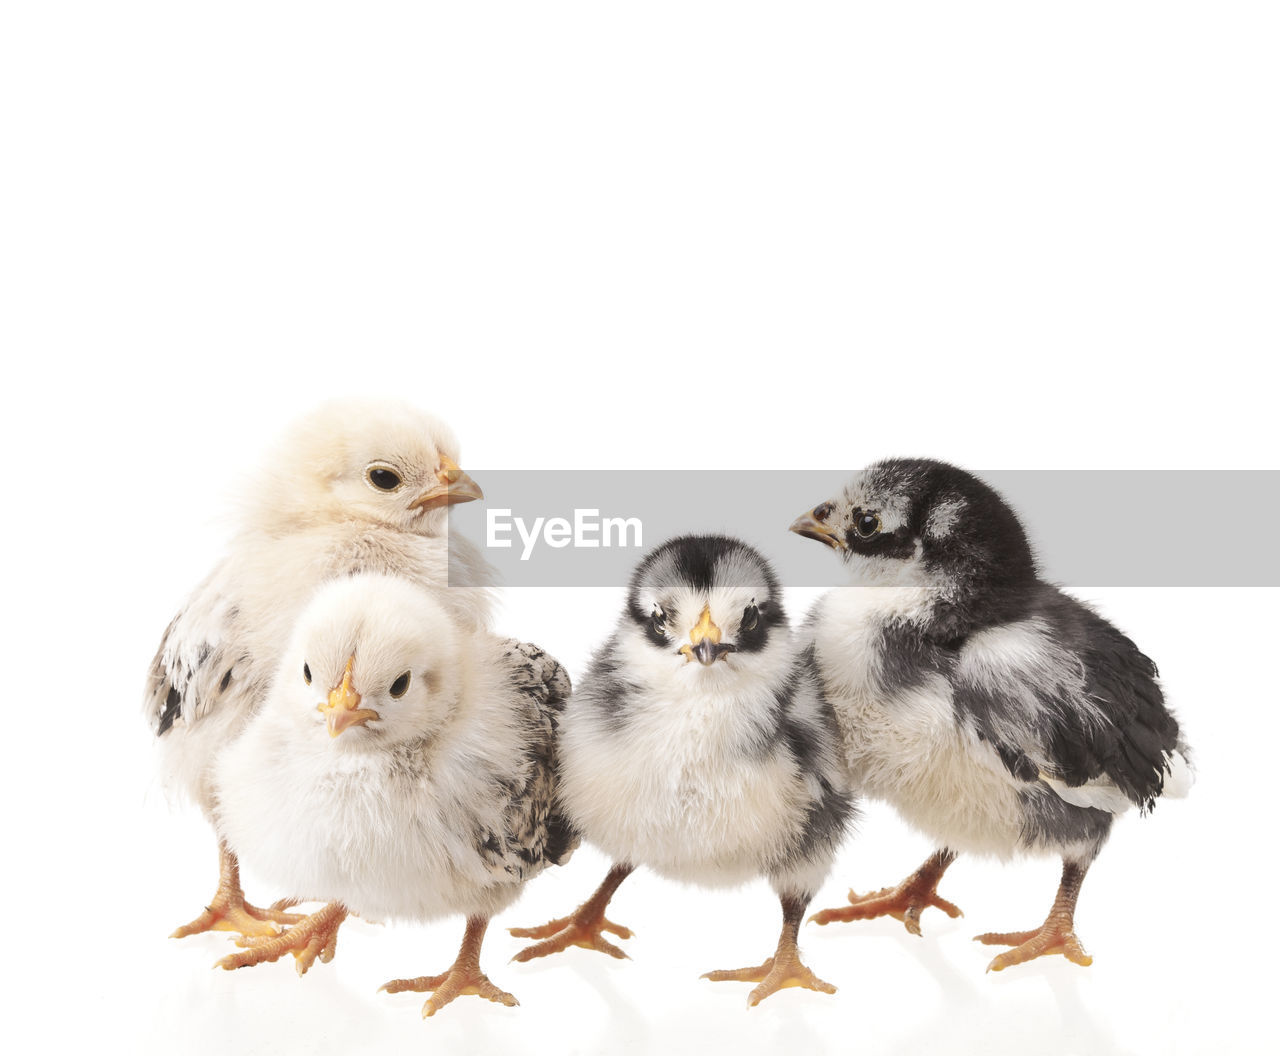 Close-up of birds against white background